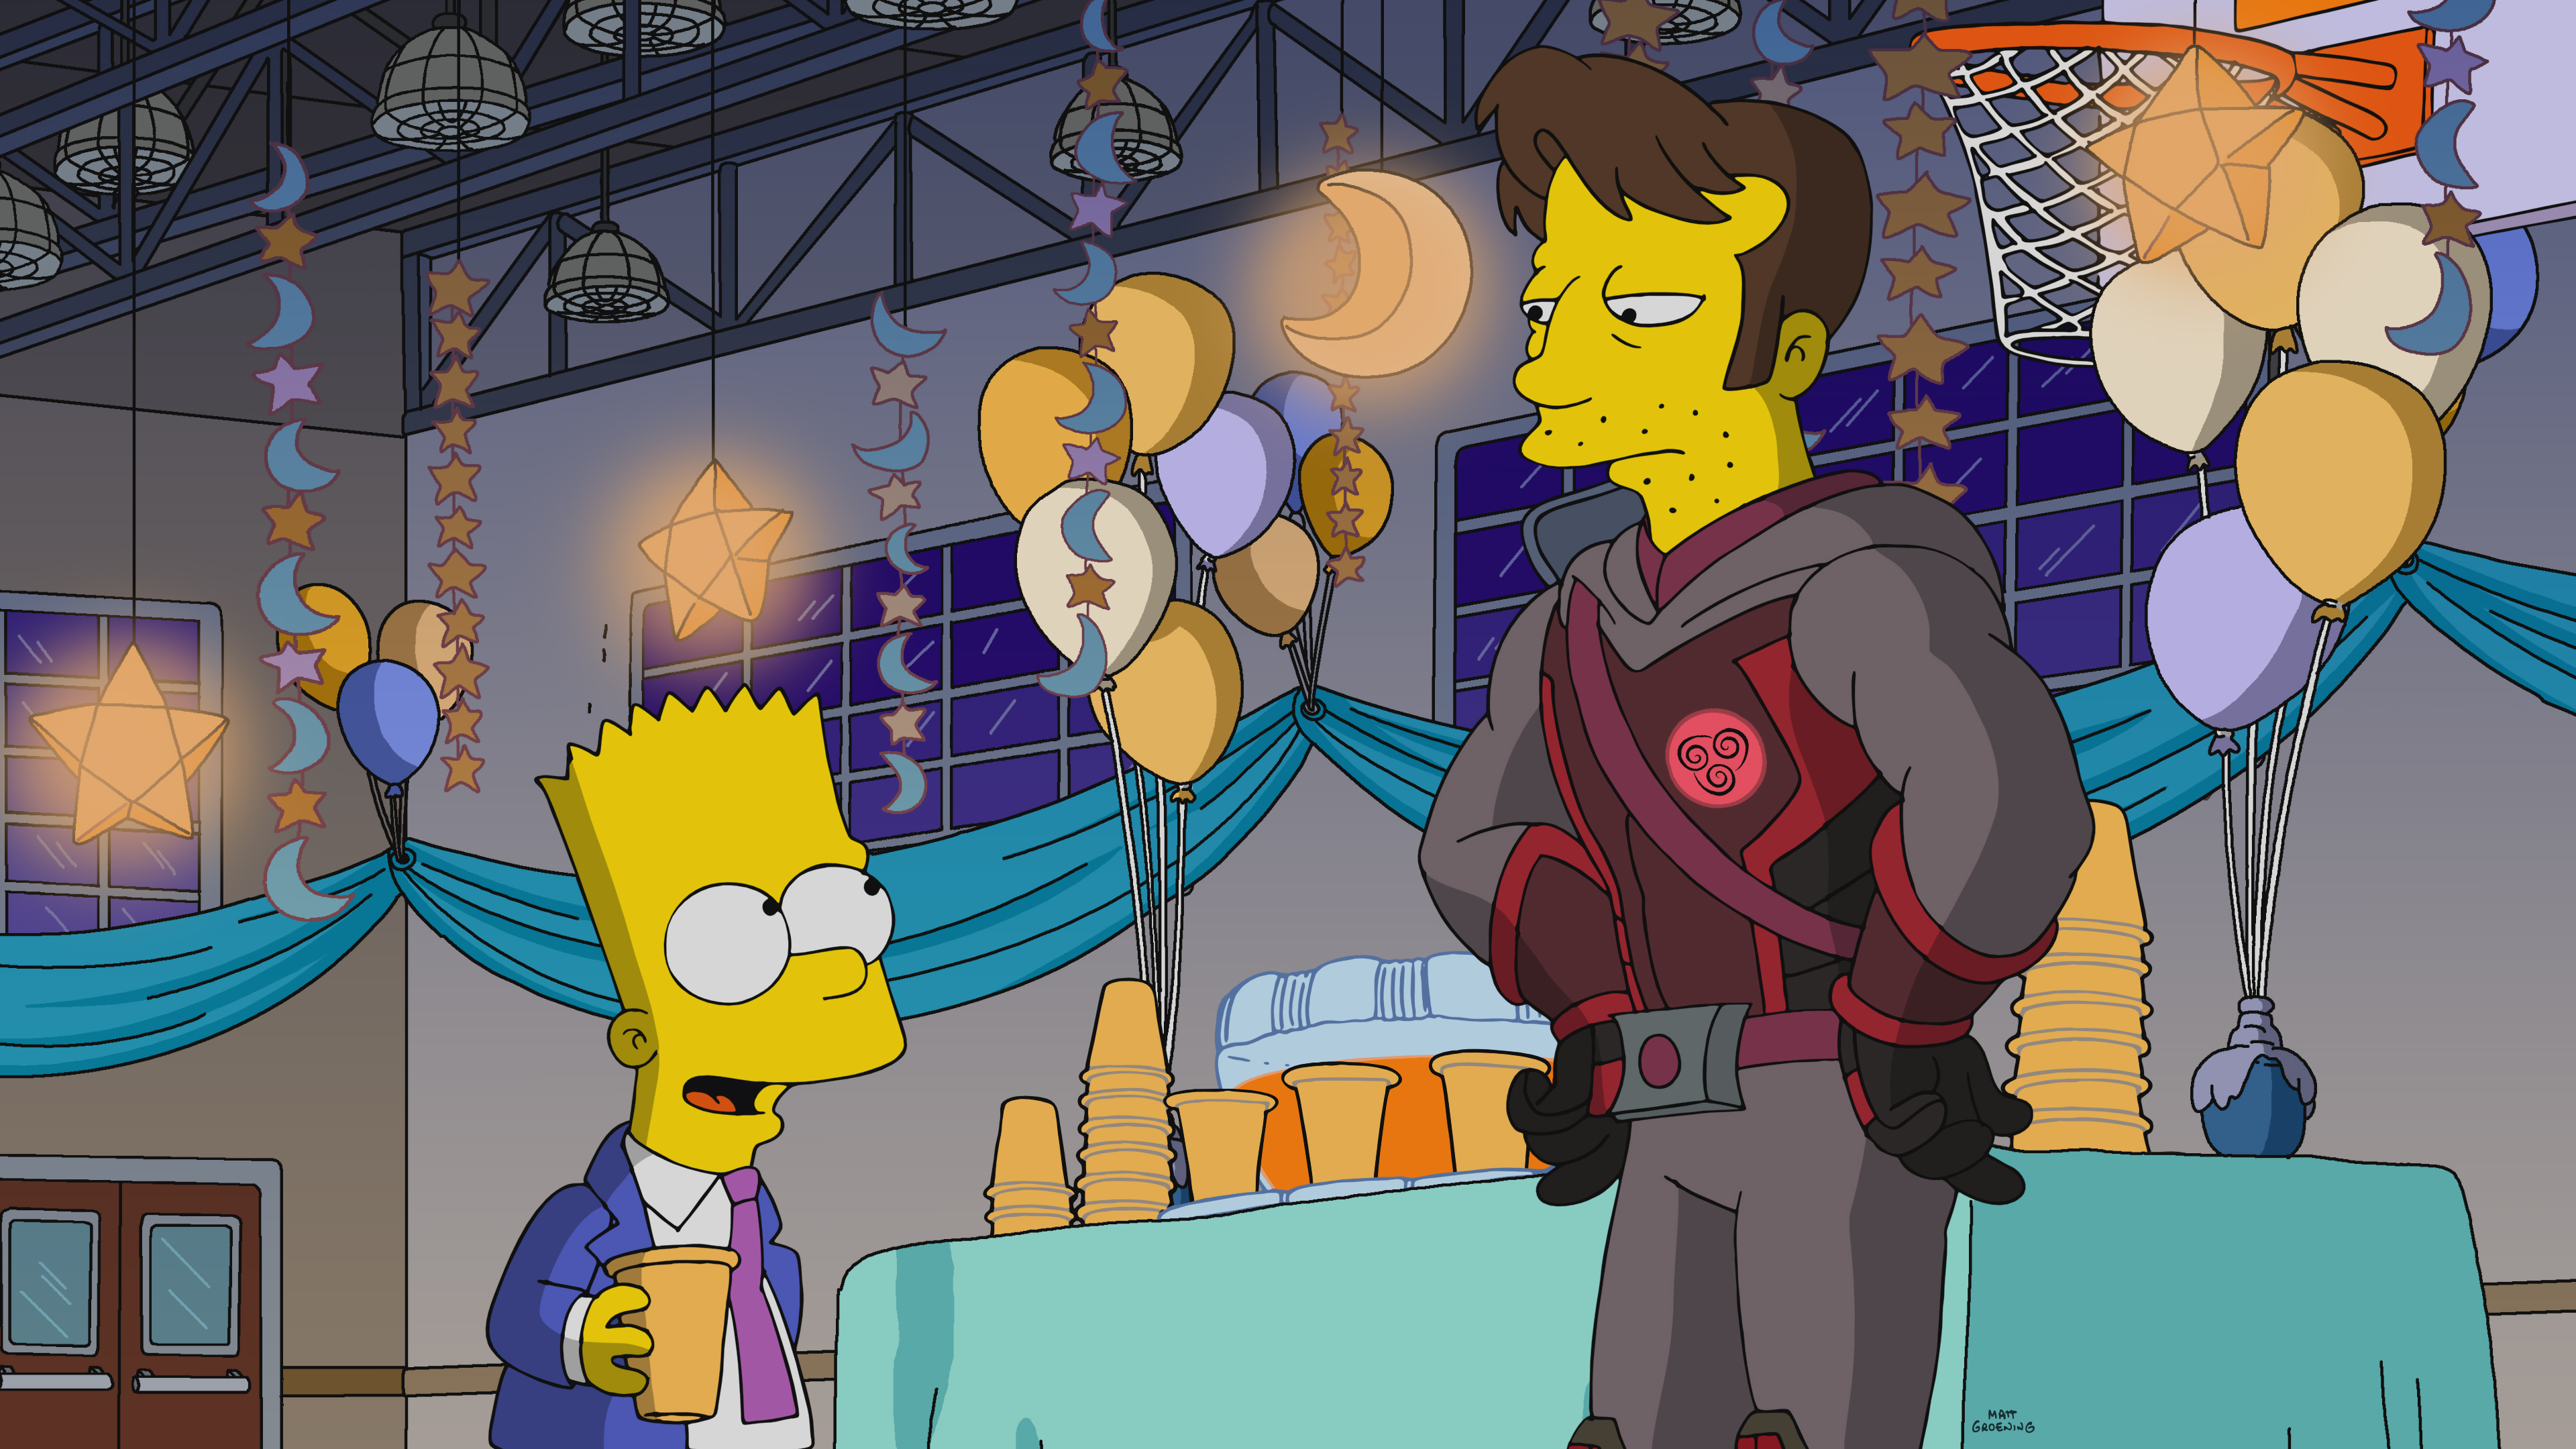 The Simpsons Season 31 Episode 14 Review: Bart The Bad Guy